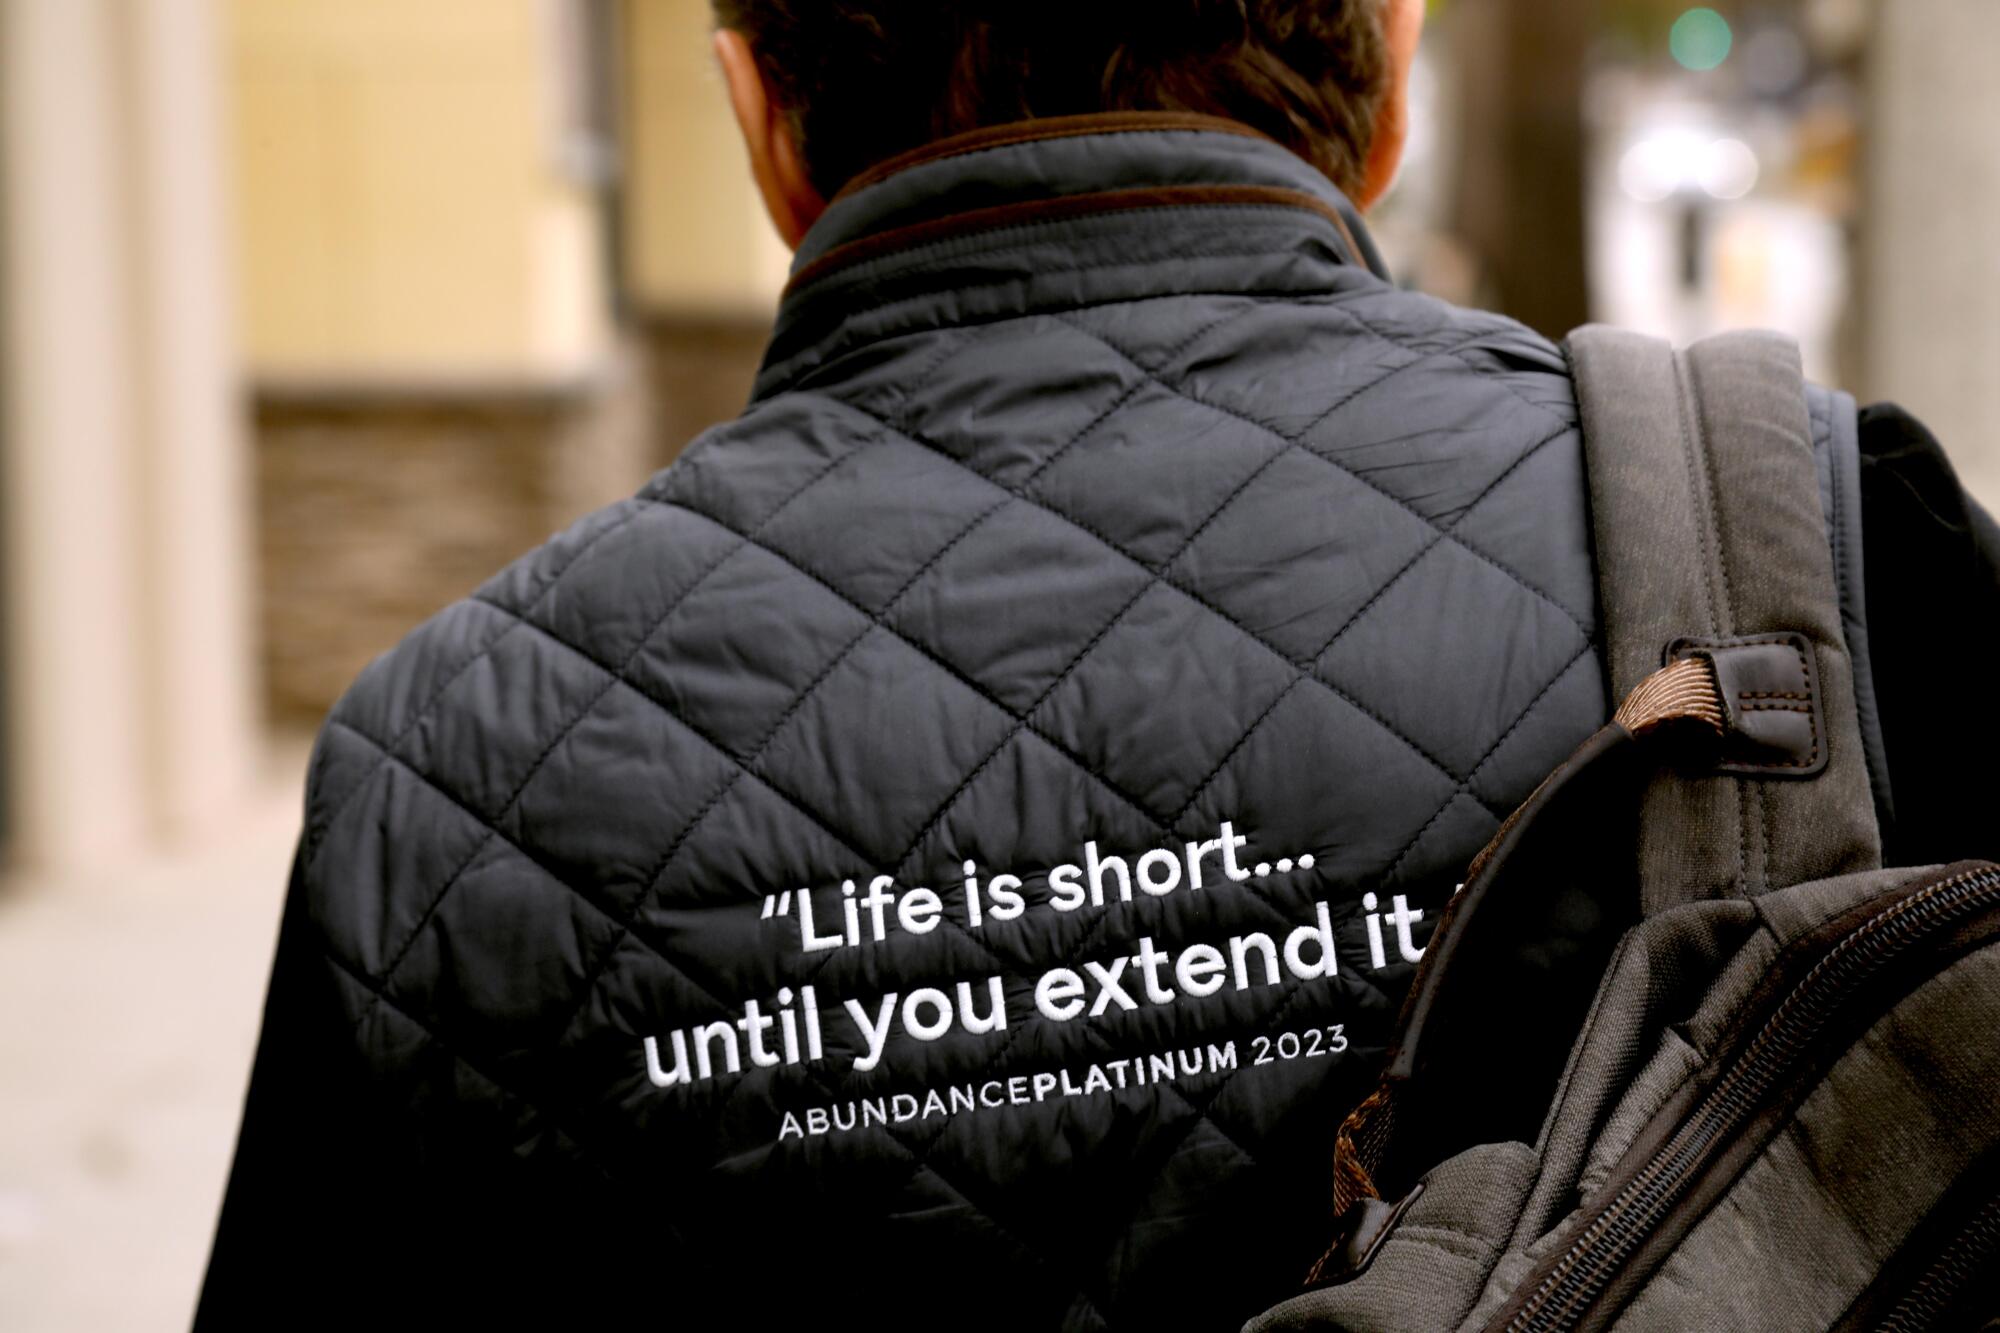 "Life is short until you extend it," is written on Dr. Peter Diamandis' vest as he walks to his doctor's office.